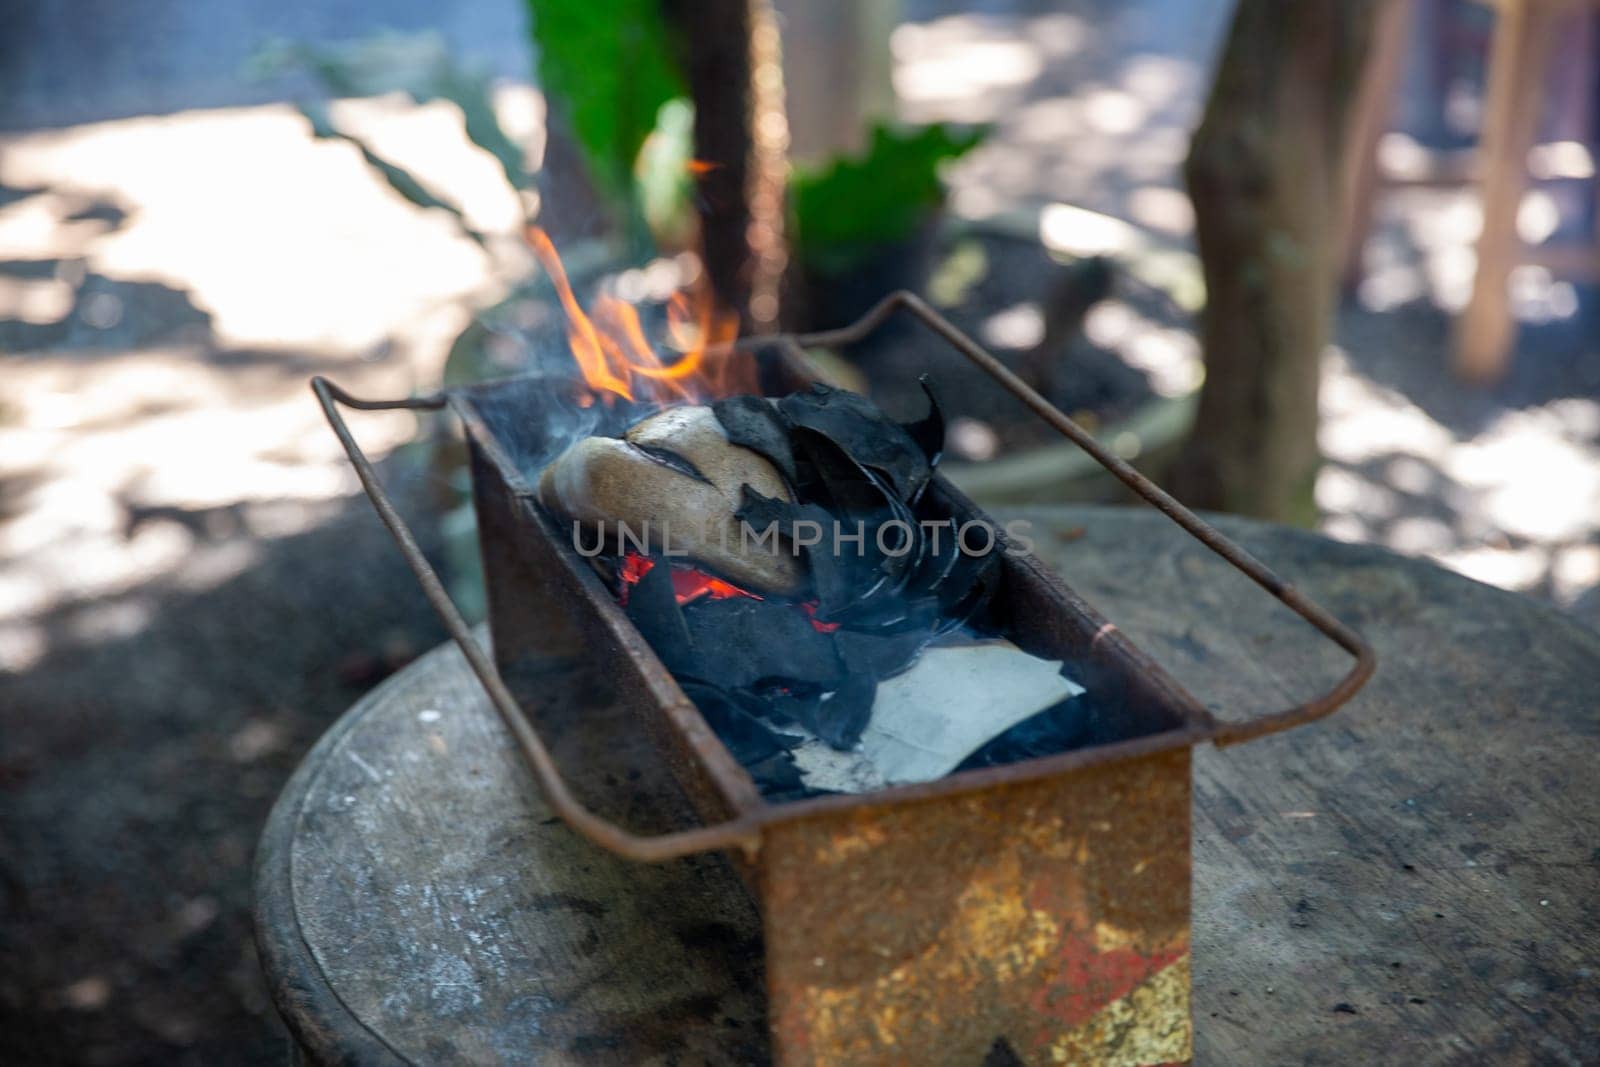 Traditional Balianese Coconut Grill with flames